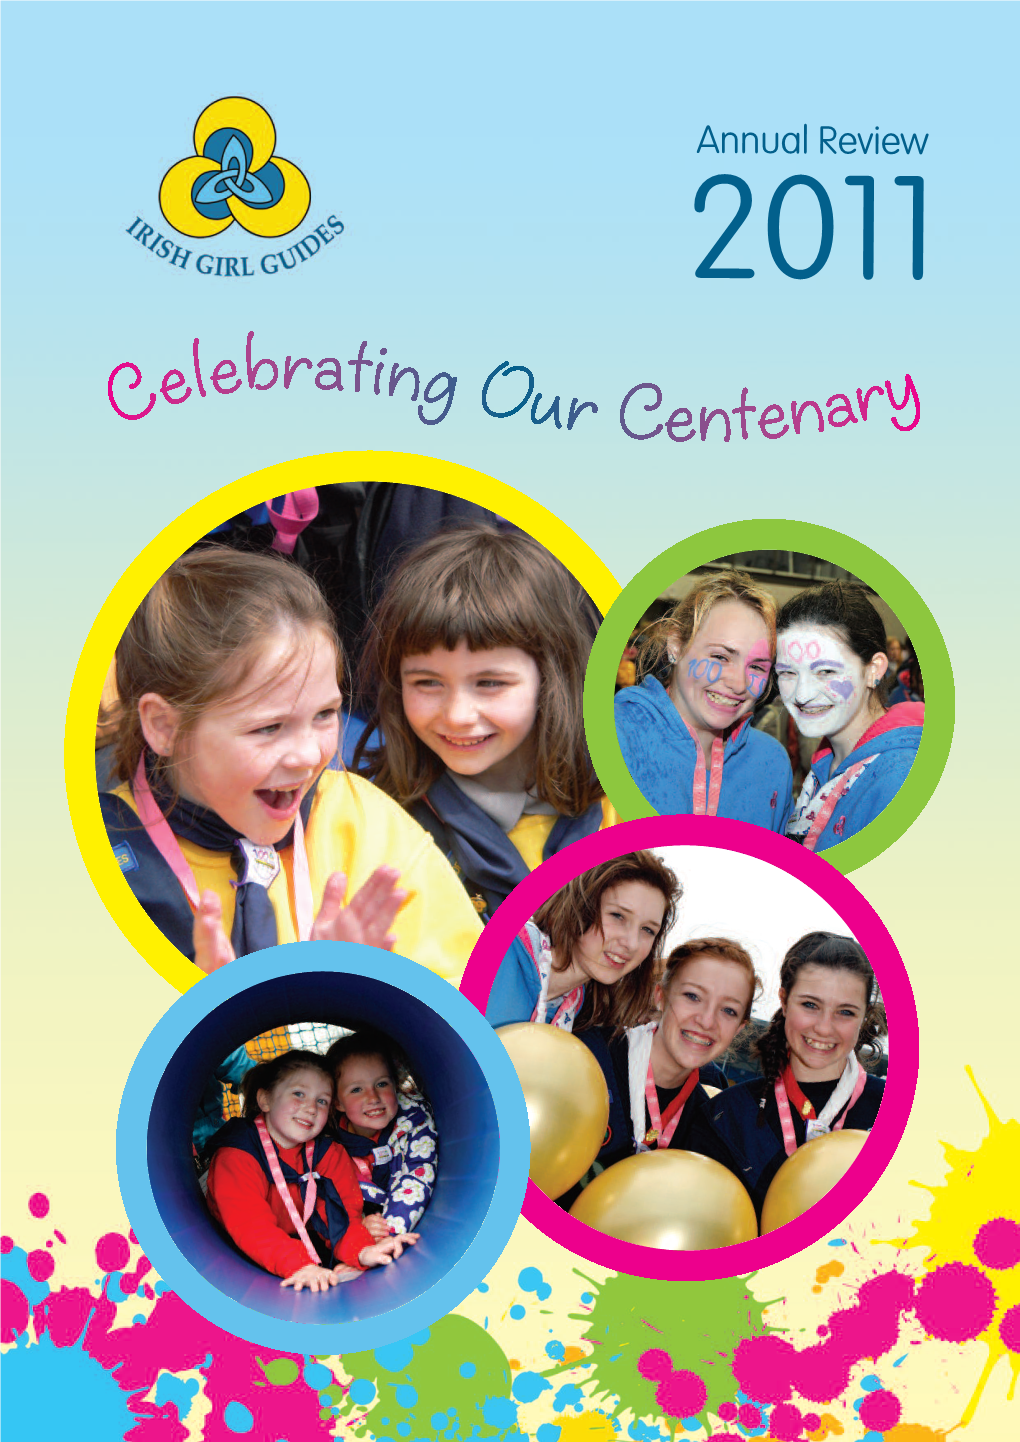 Irish Girl Guides Annual Review 2011